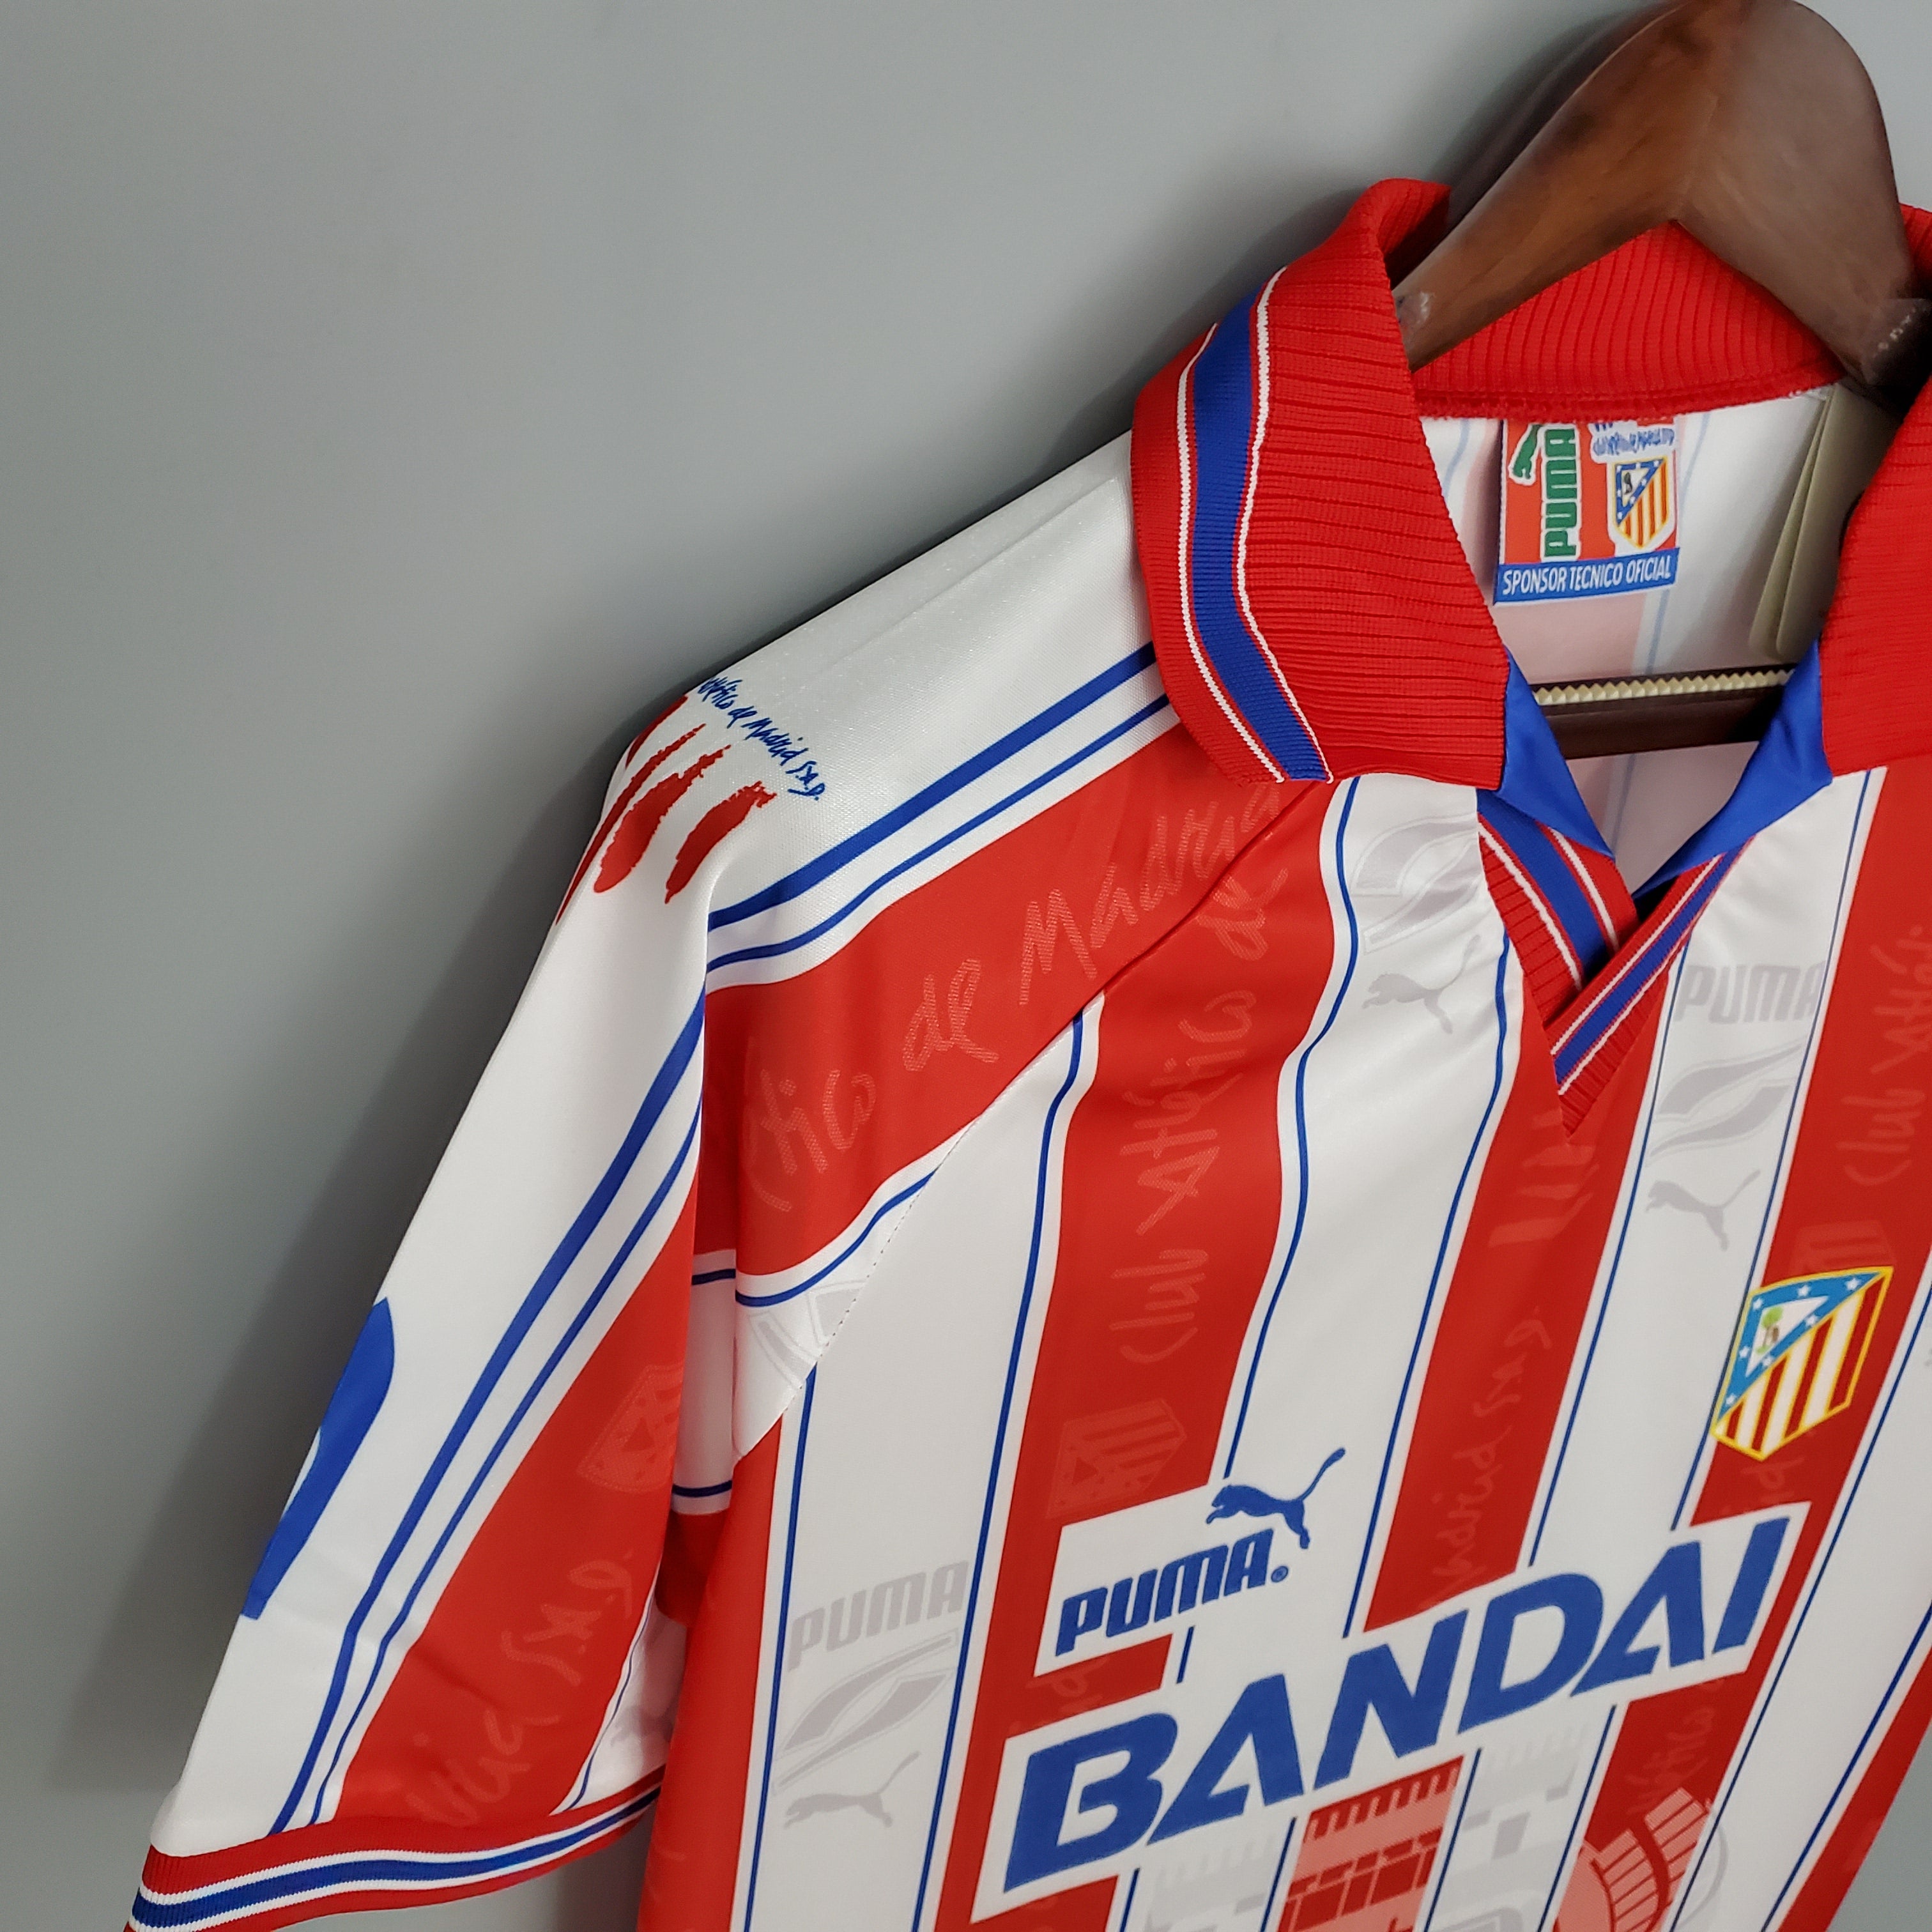 Atletico Madrid 1996-97 Home Jersey